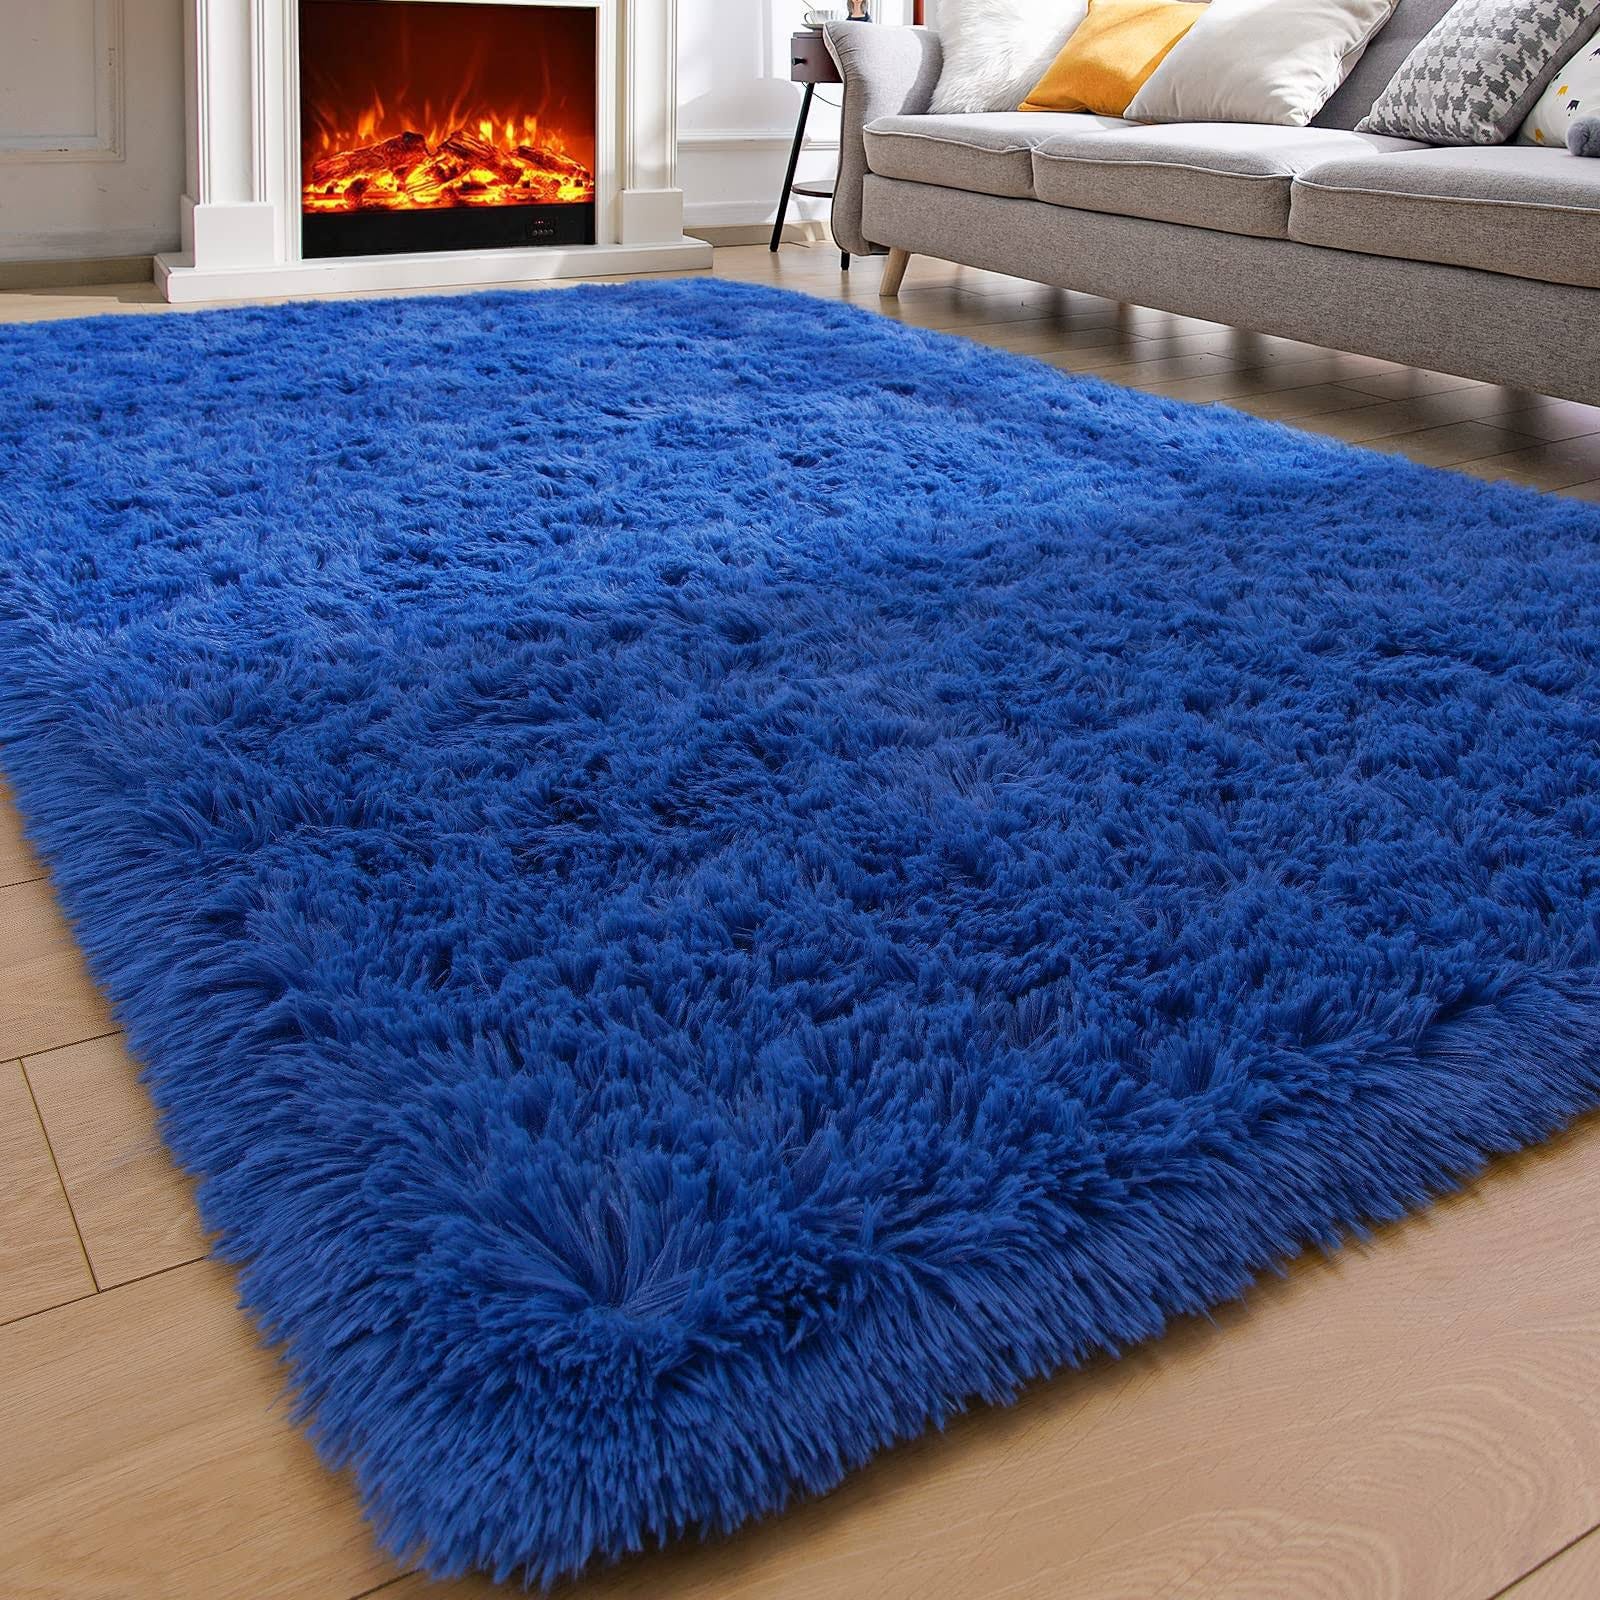 Plush, Navy Blue Shag Rug for Luxurious Living Spaces | Image